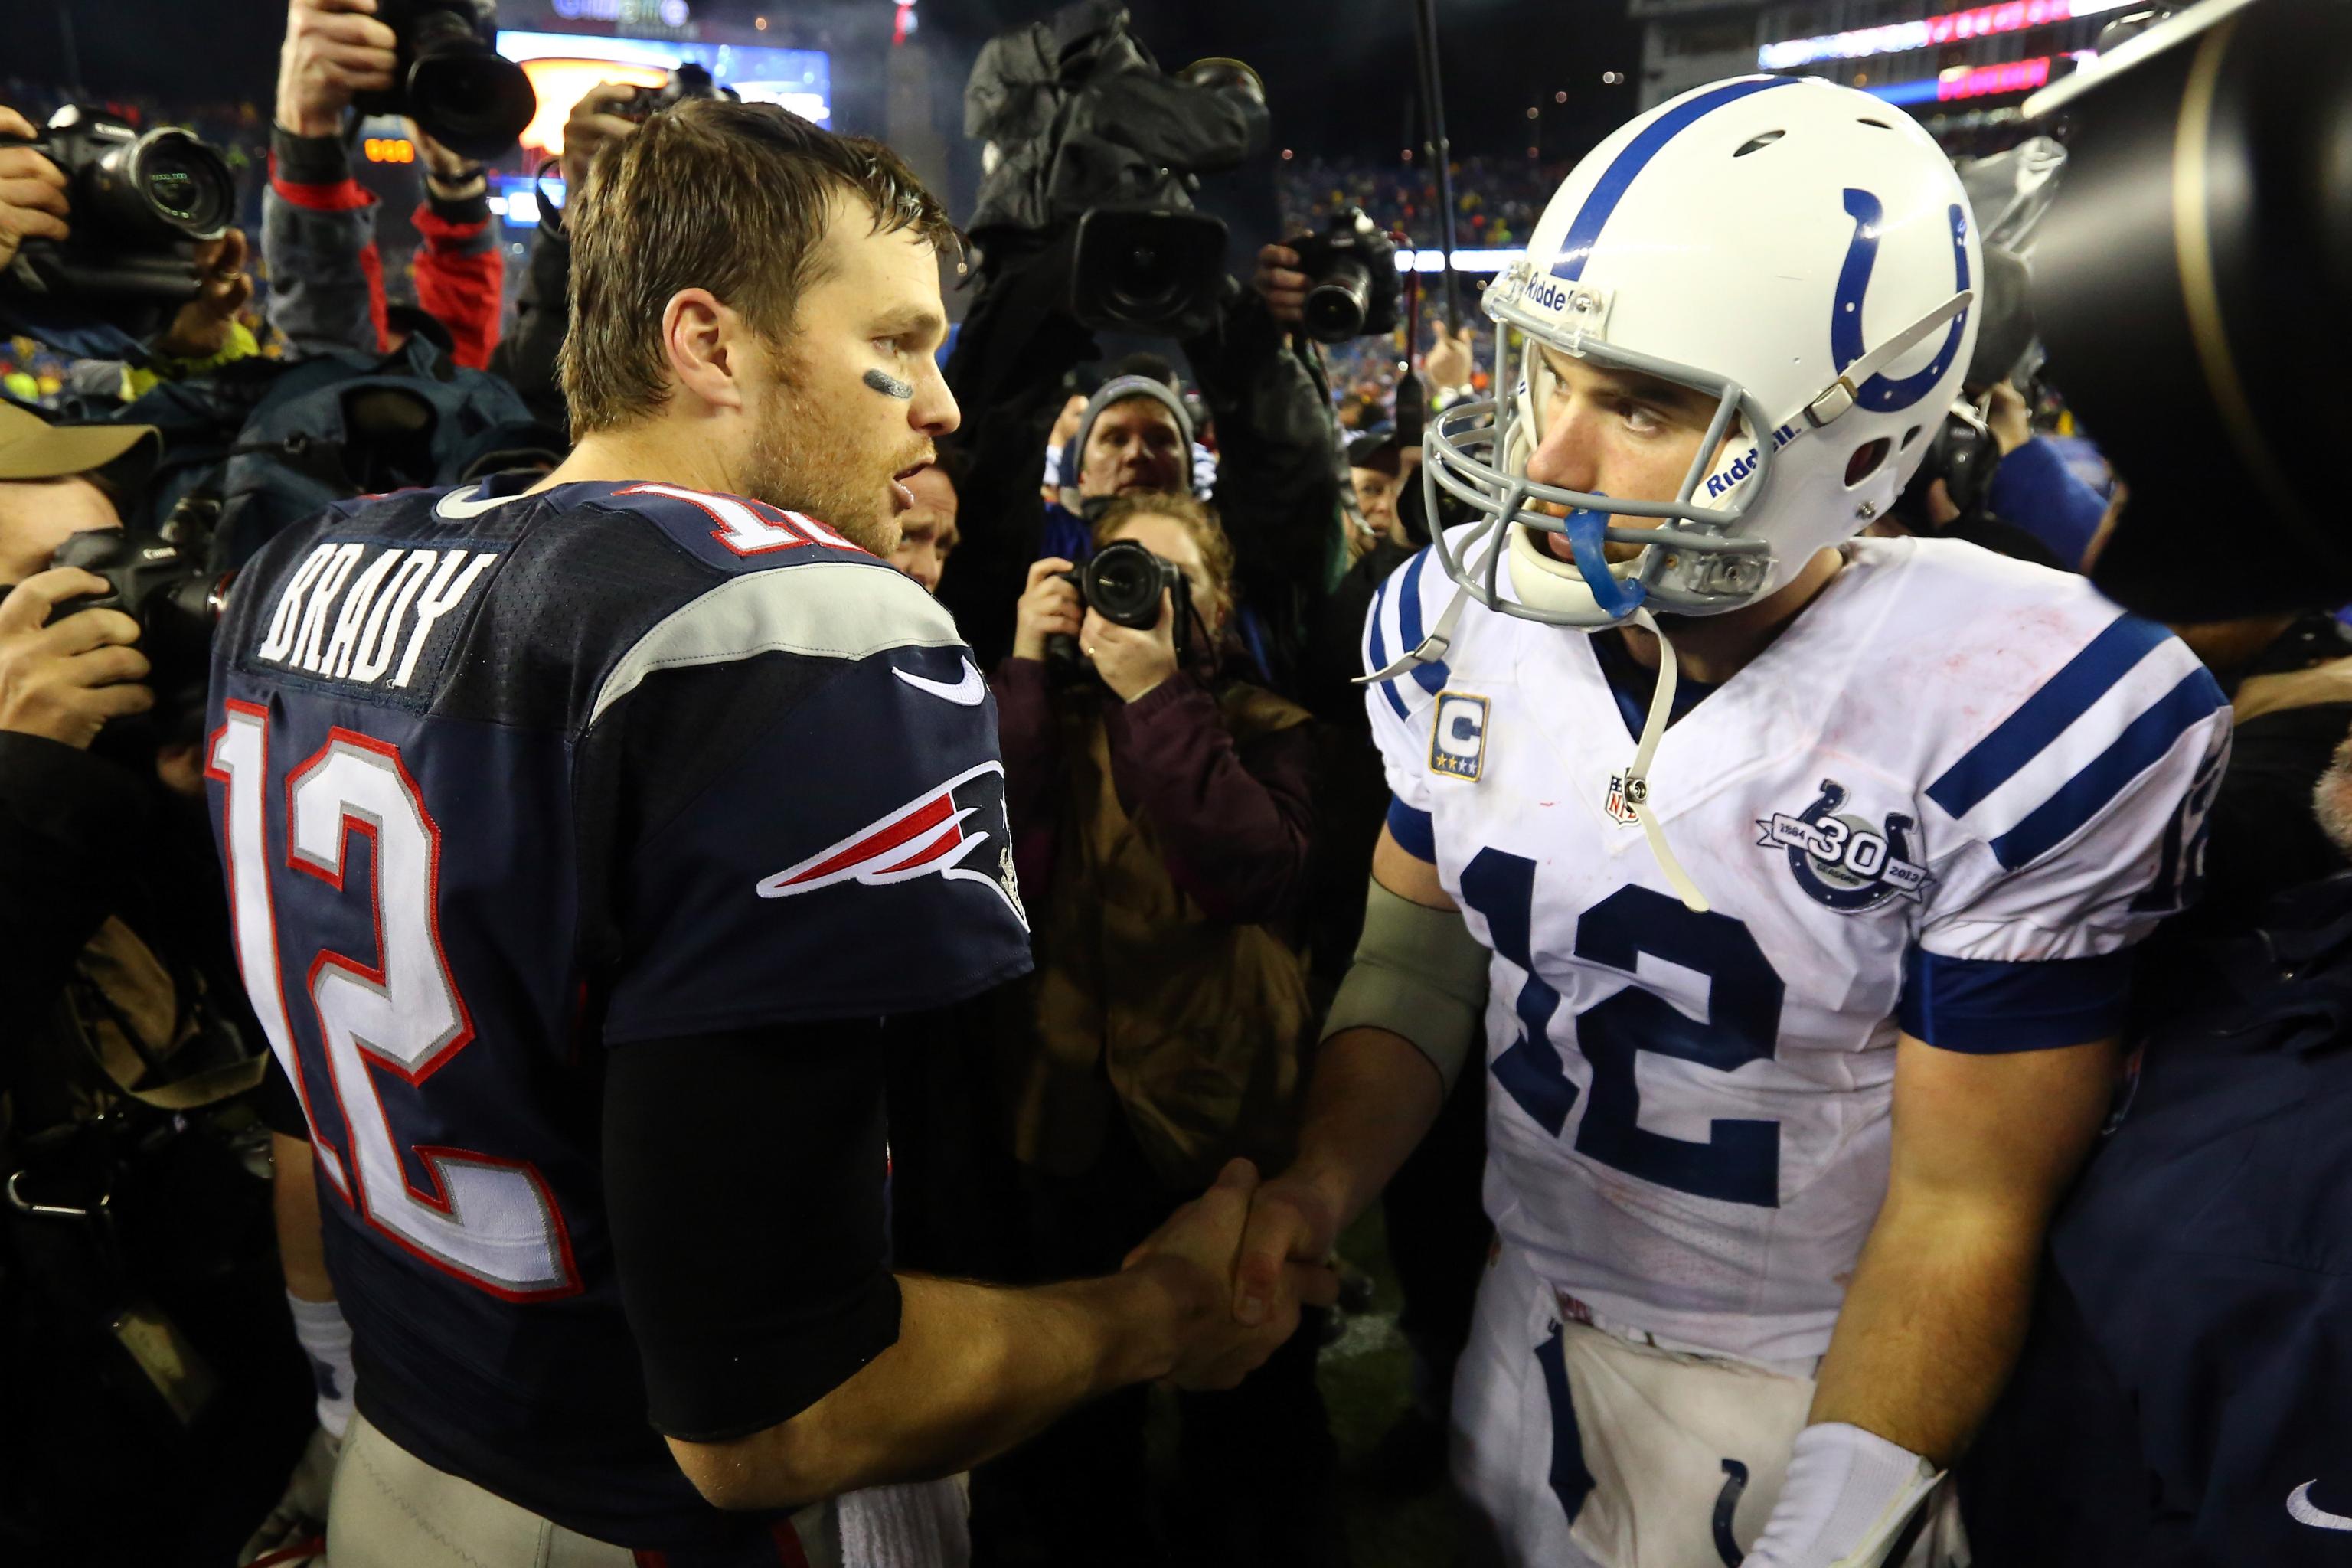 2015 NFL playoff schedule, AFC Championship game: Colts vs. Patriots live  stream, TV schedule - Music City Miracles